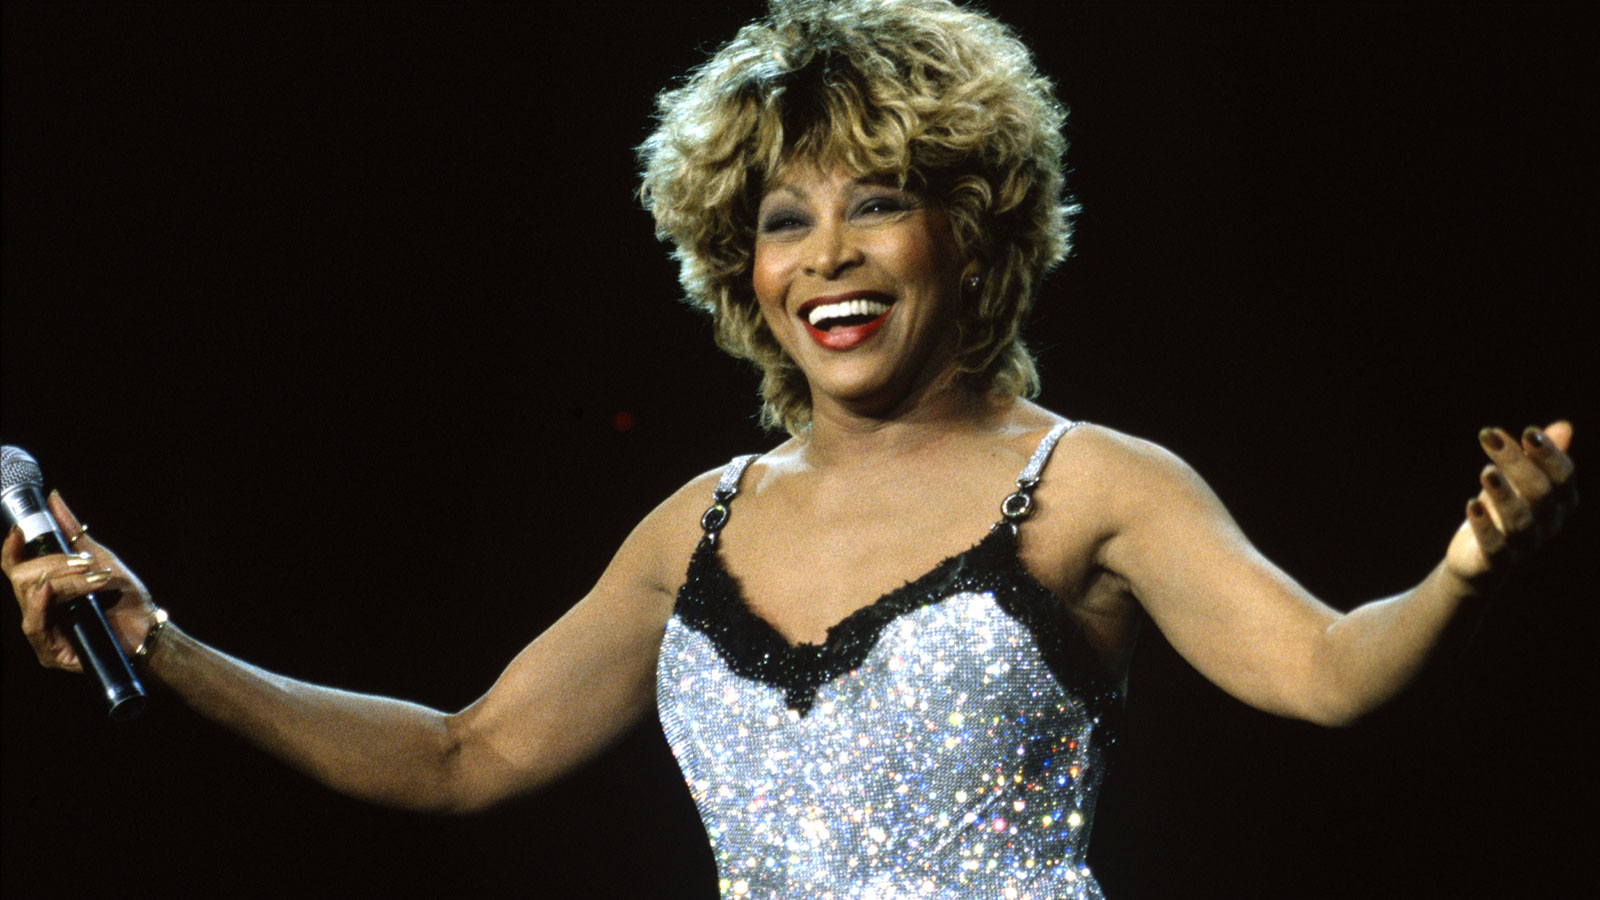 Tina Turner performs at Shoreline Amphitheatre on May 23, 1997 in Mountain View California. 